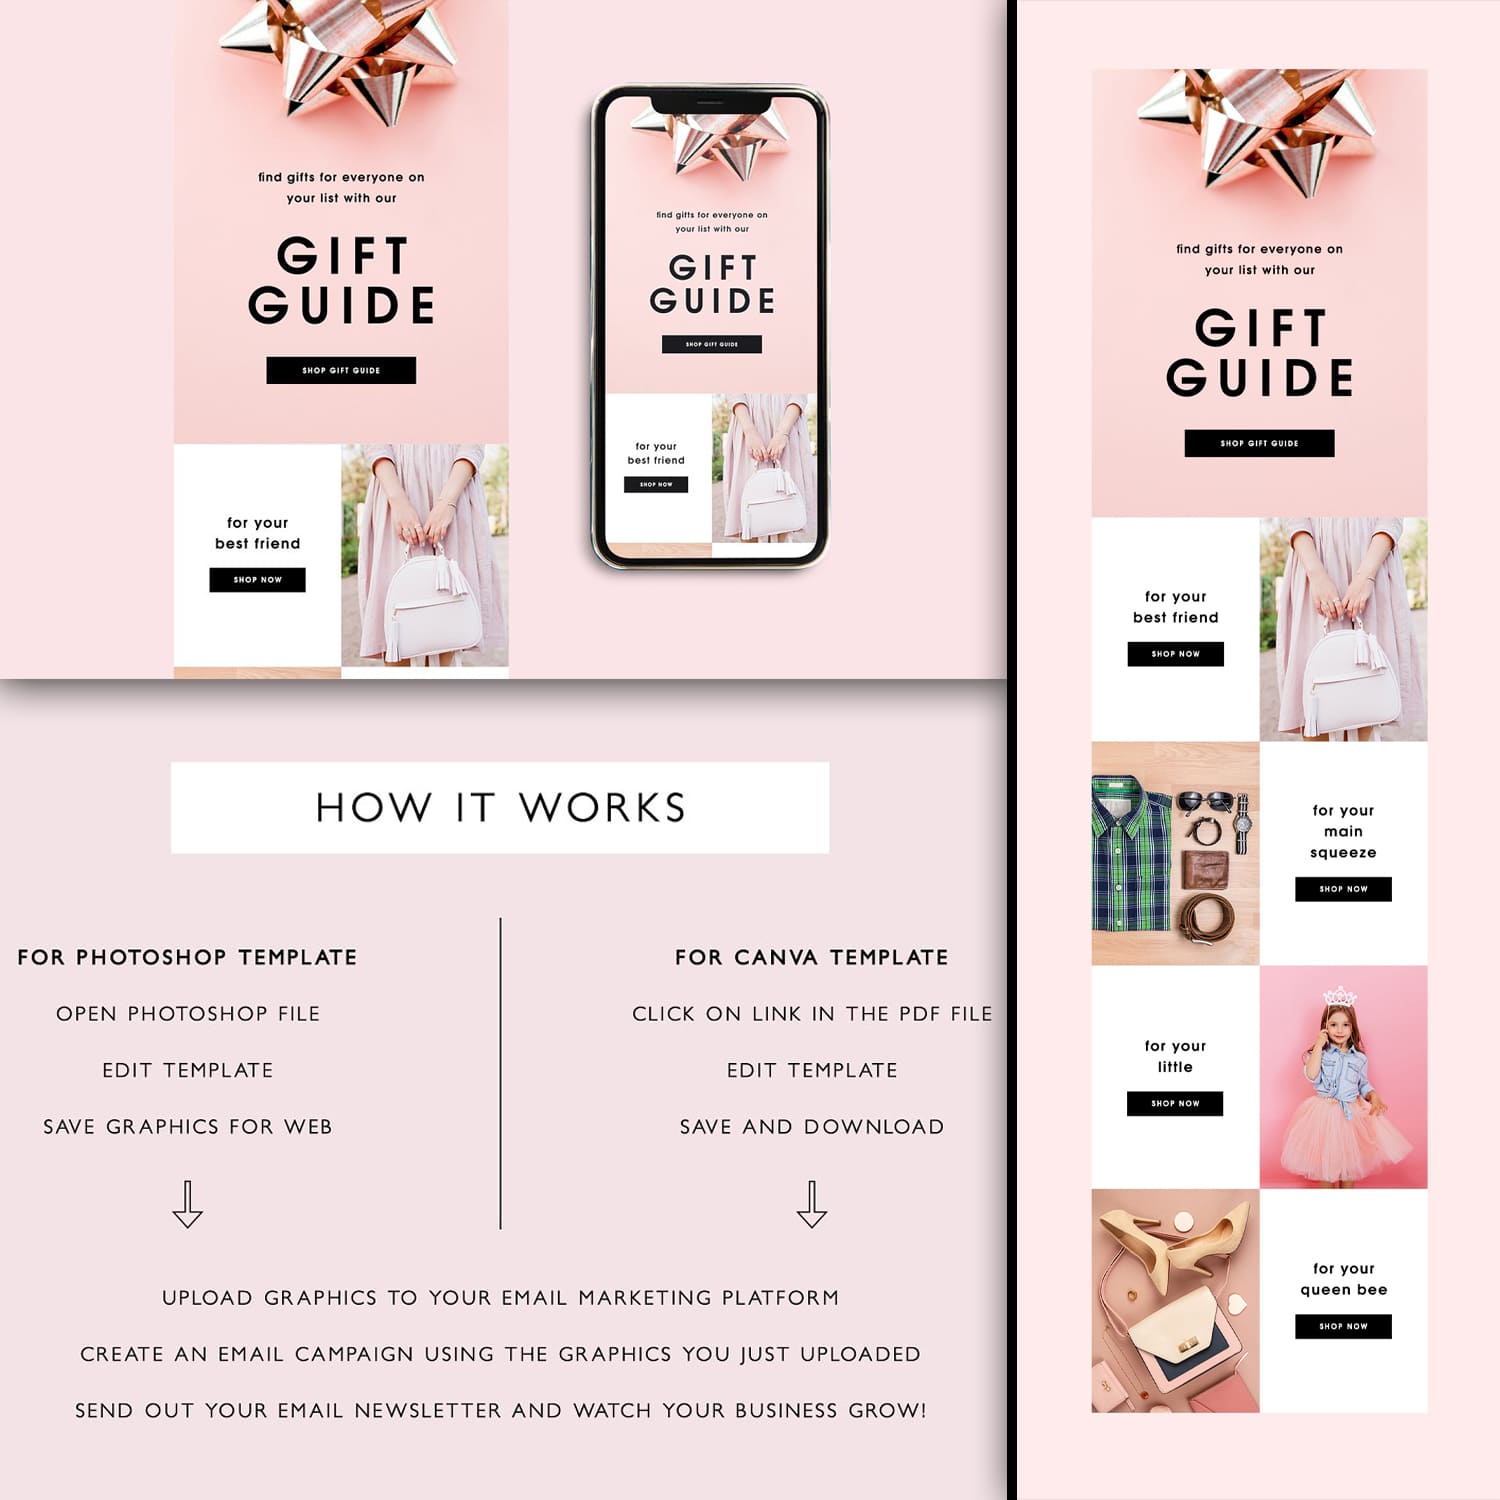 Holiday Gift Guide Email Template Cover.